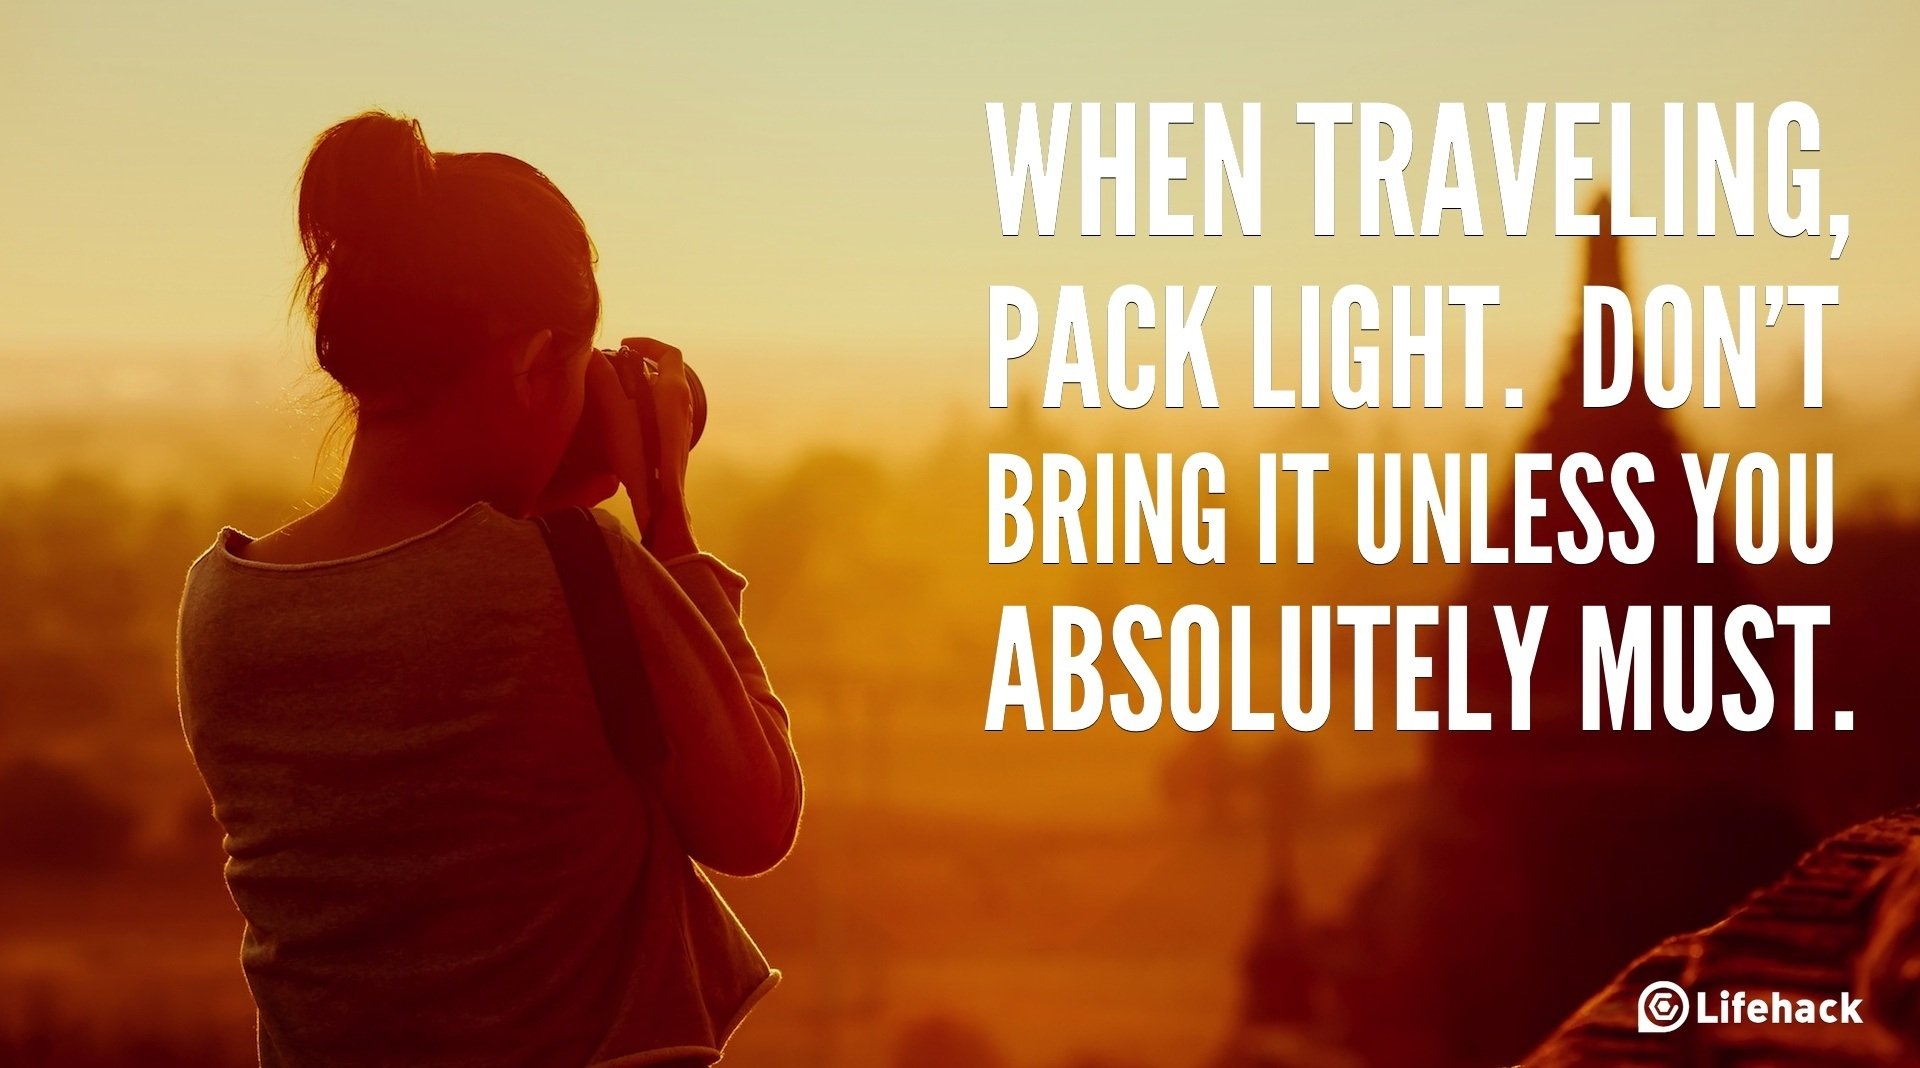 When traveling, pack light.  Don’t bring it unless you absolutely must.